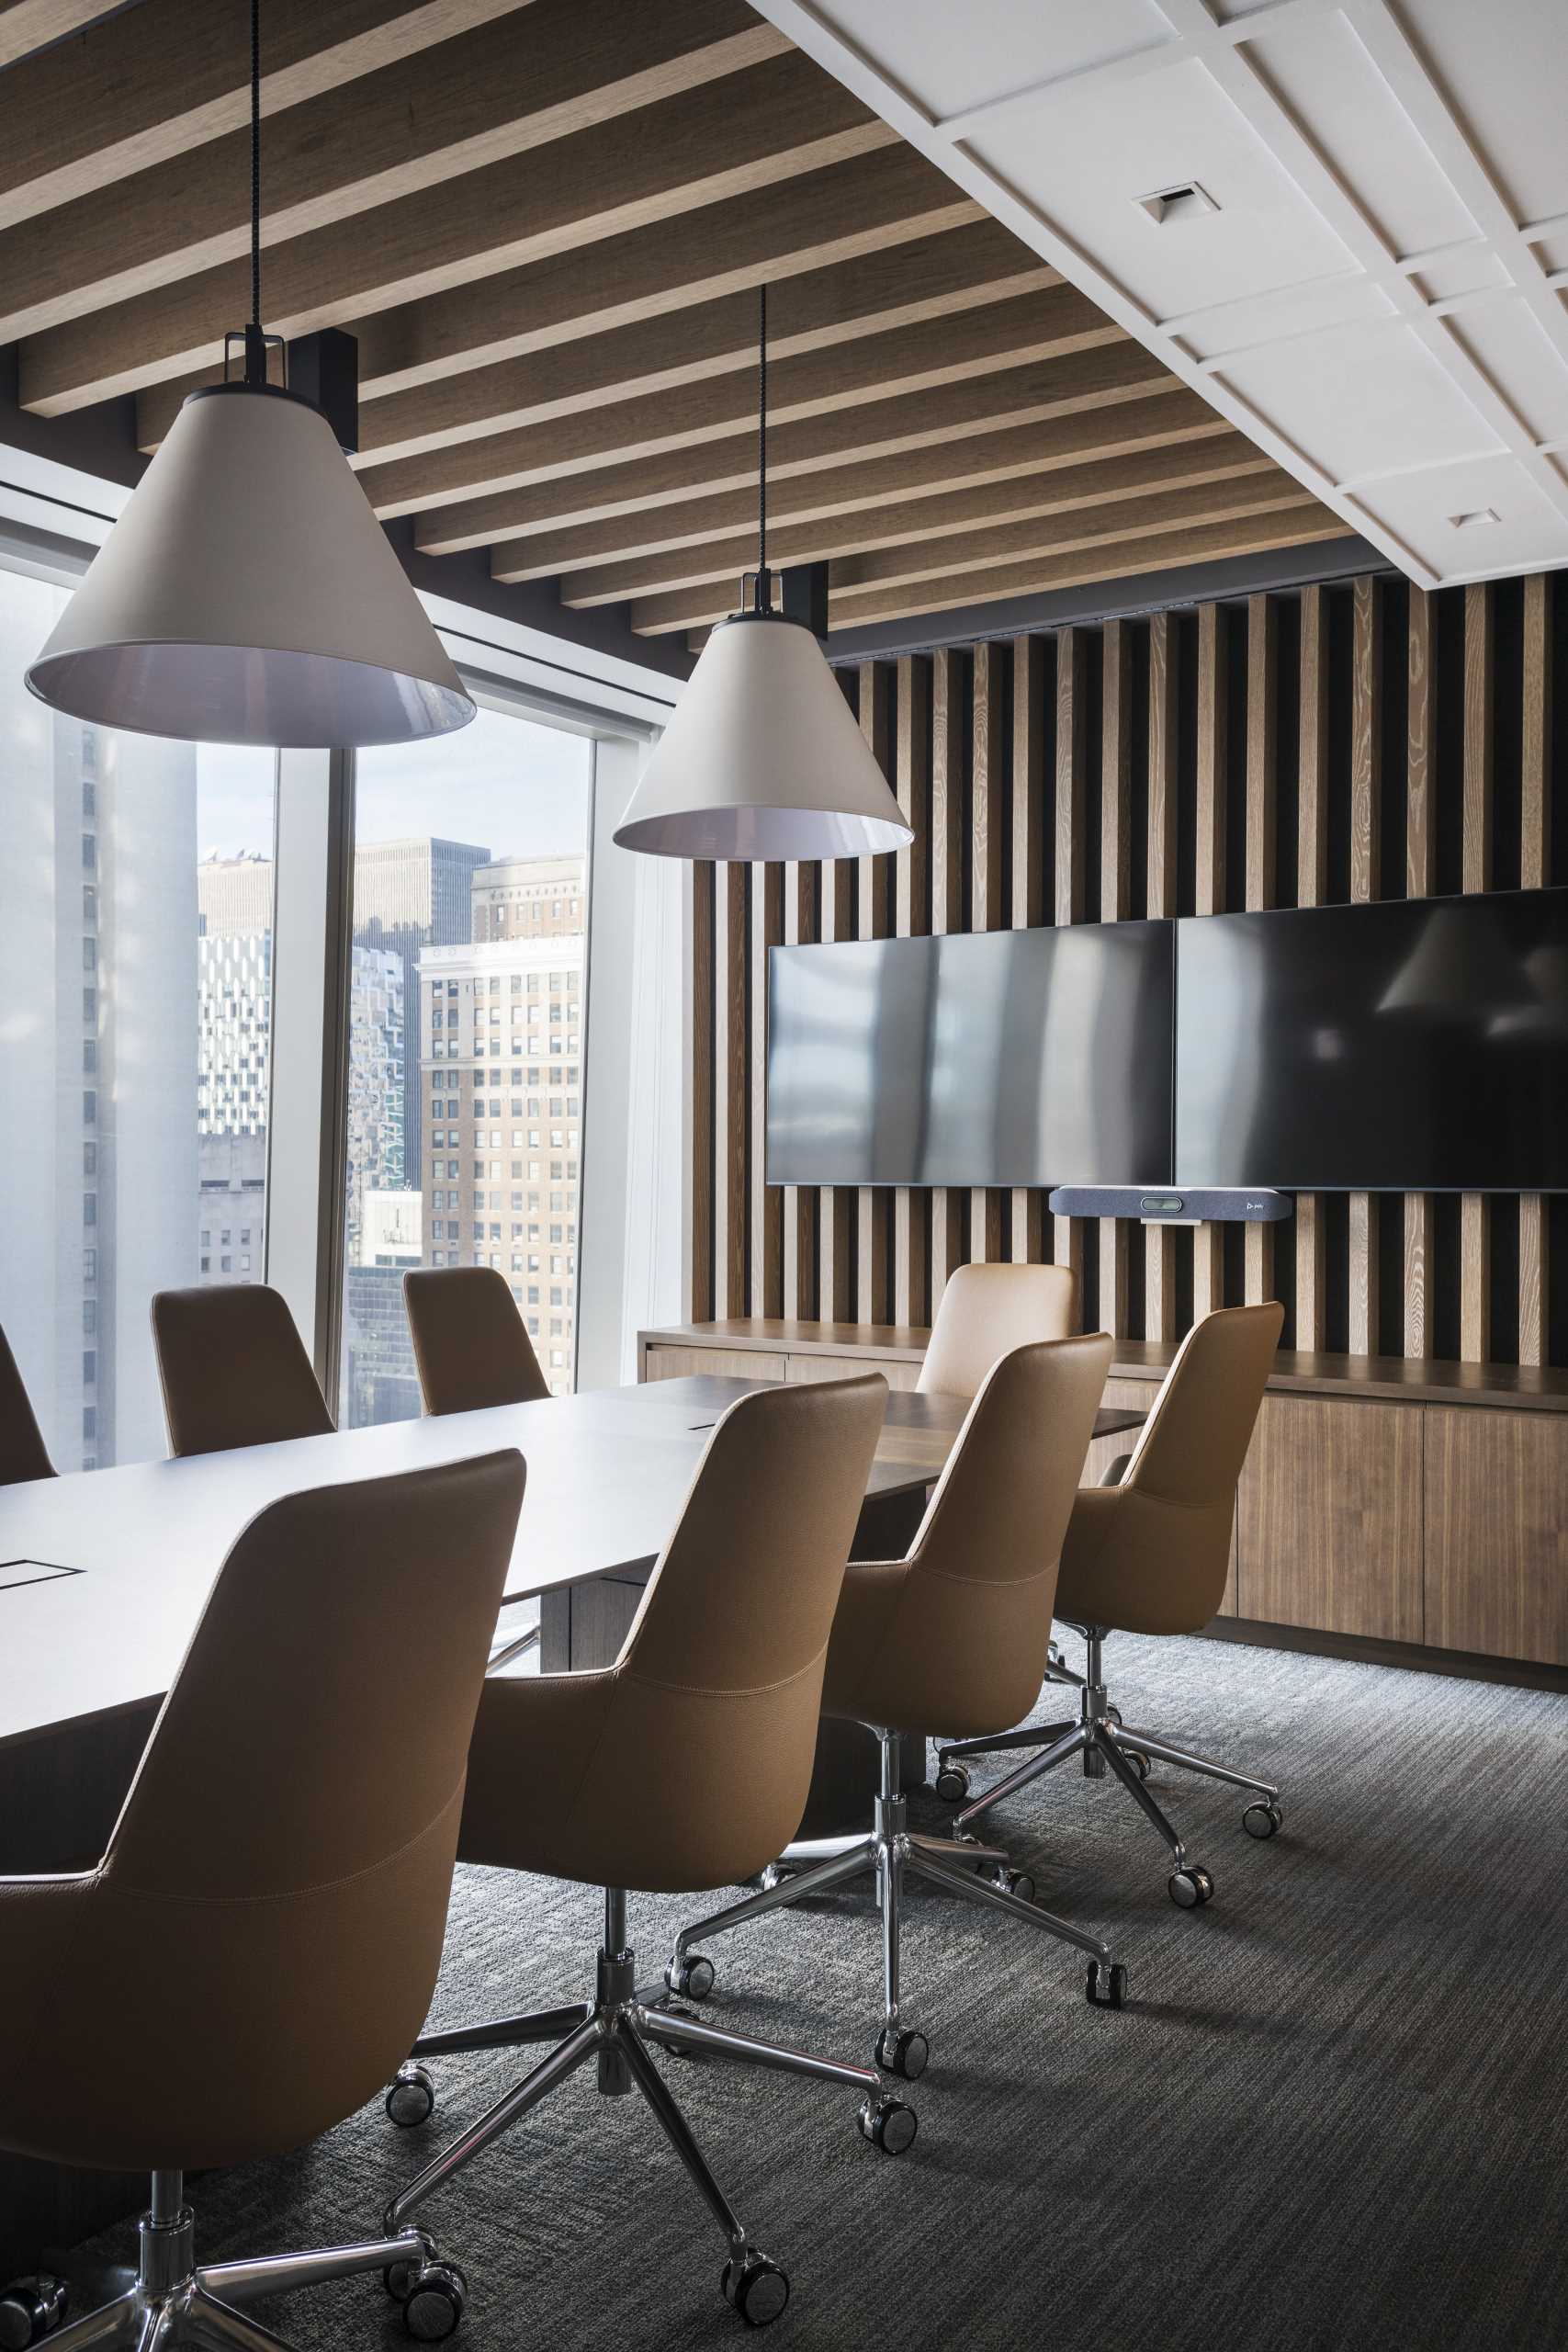 In this modern conference room, there's a wood slat wall and ceiling, which also meets with another part of the ceiling that's strapped with a white plaid pattern.